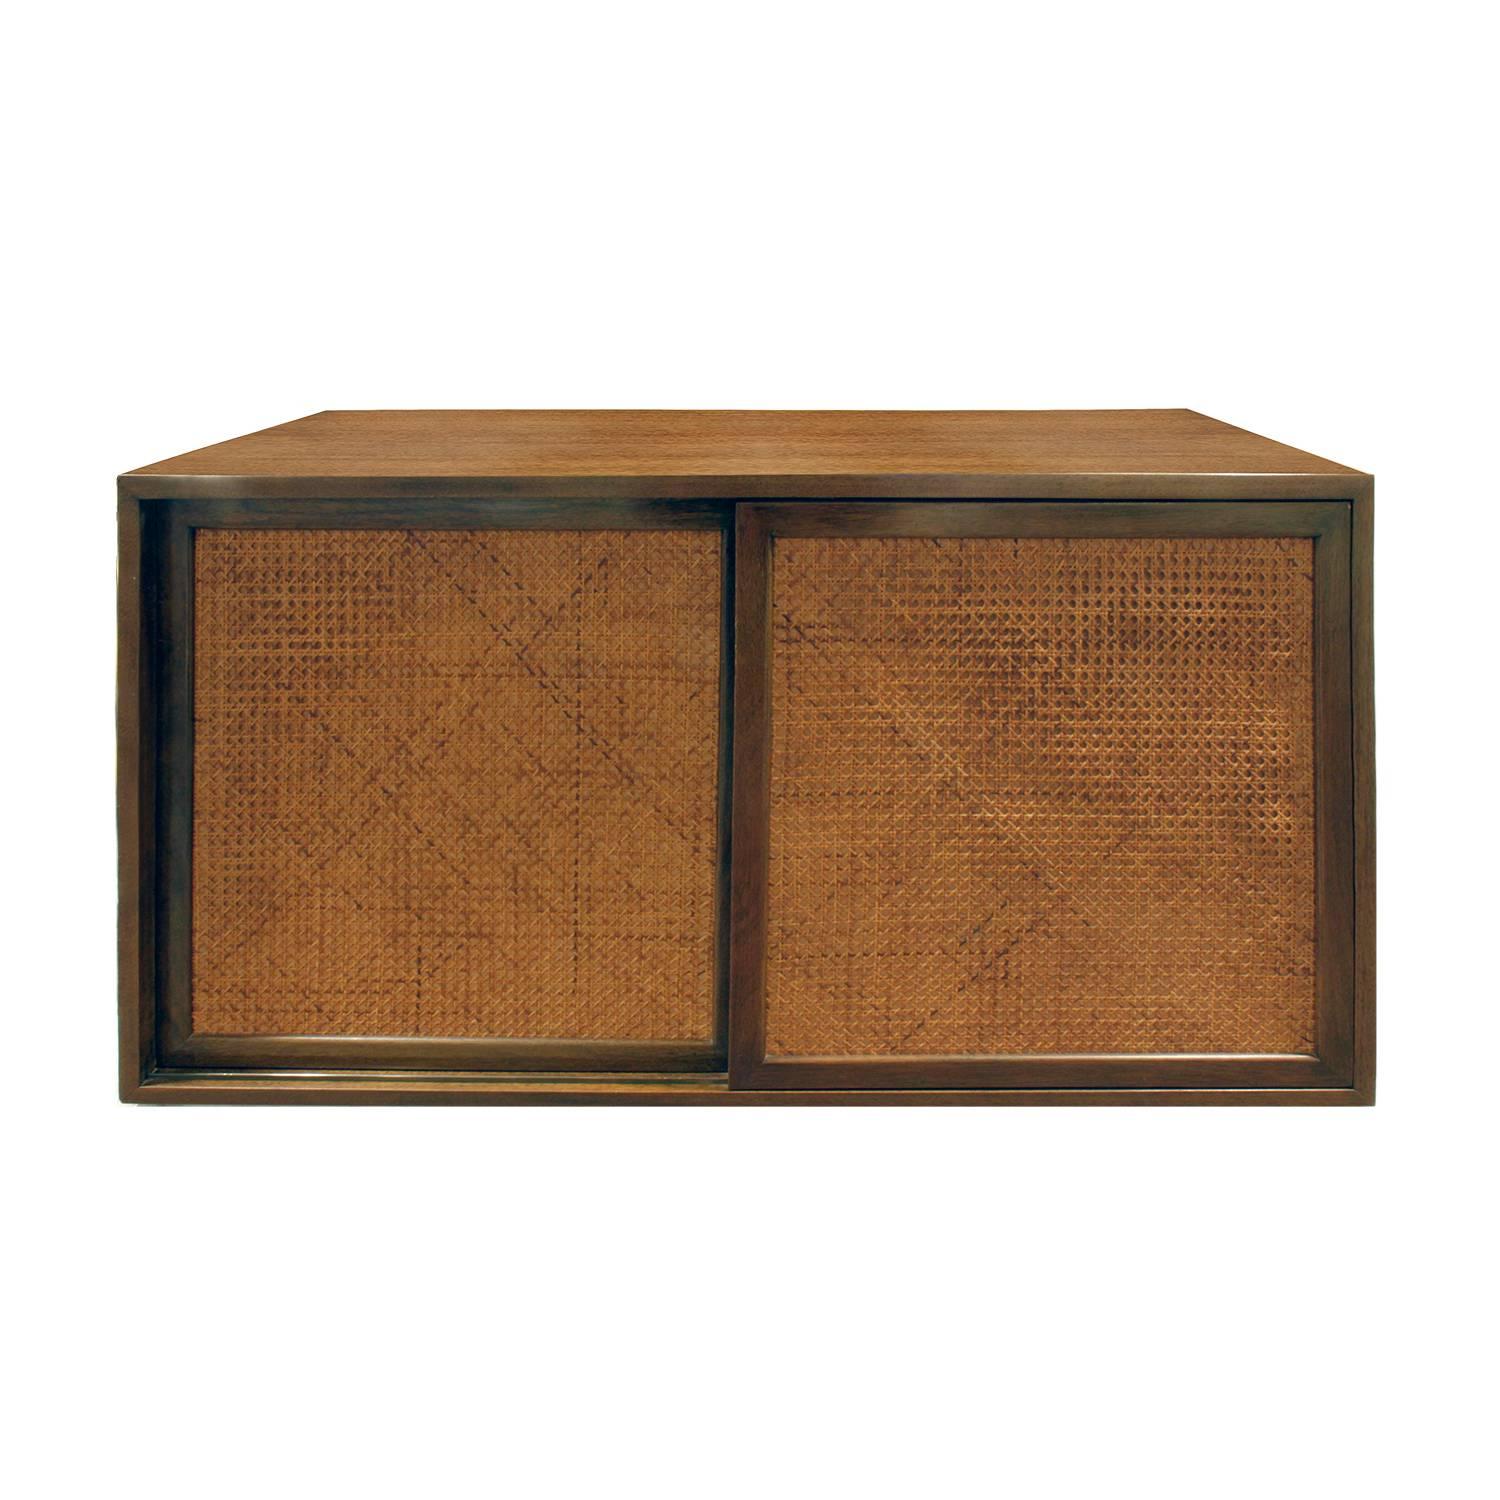 Wall mounted cabinet in mahogany with caned doors by Harvey Probber, American, 1950s.